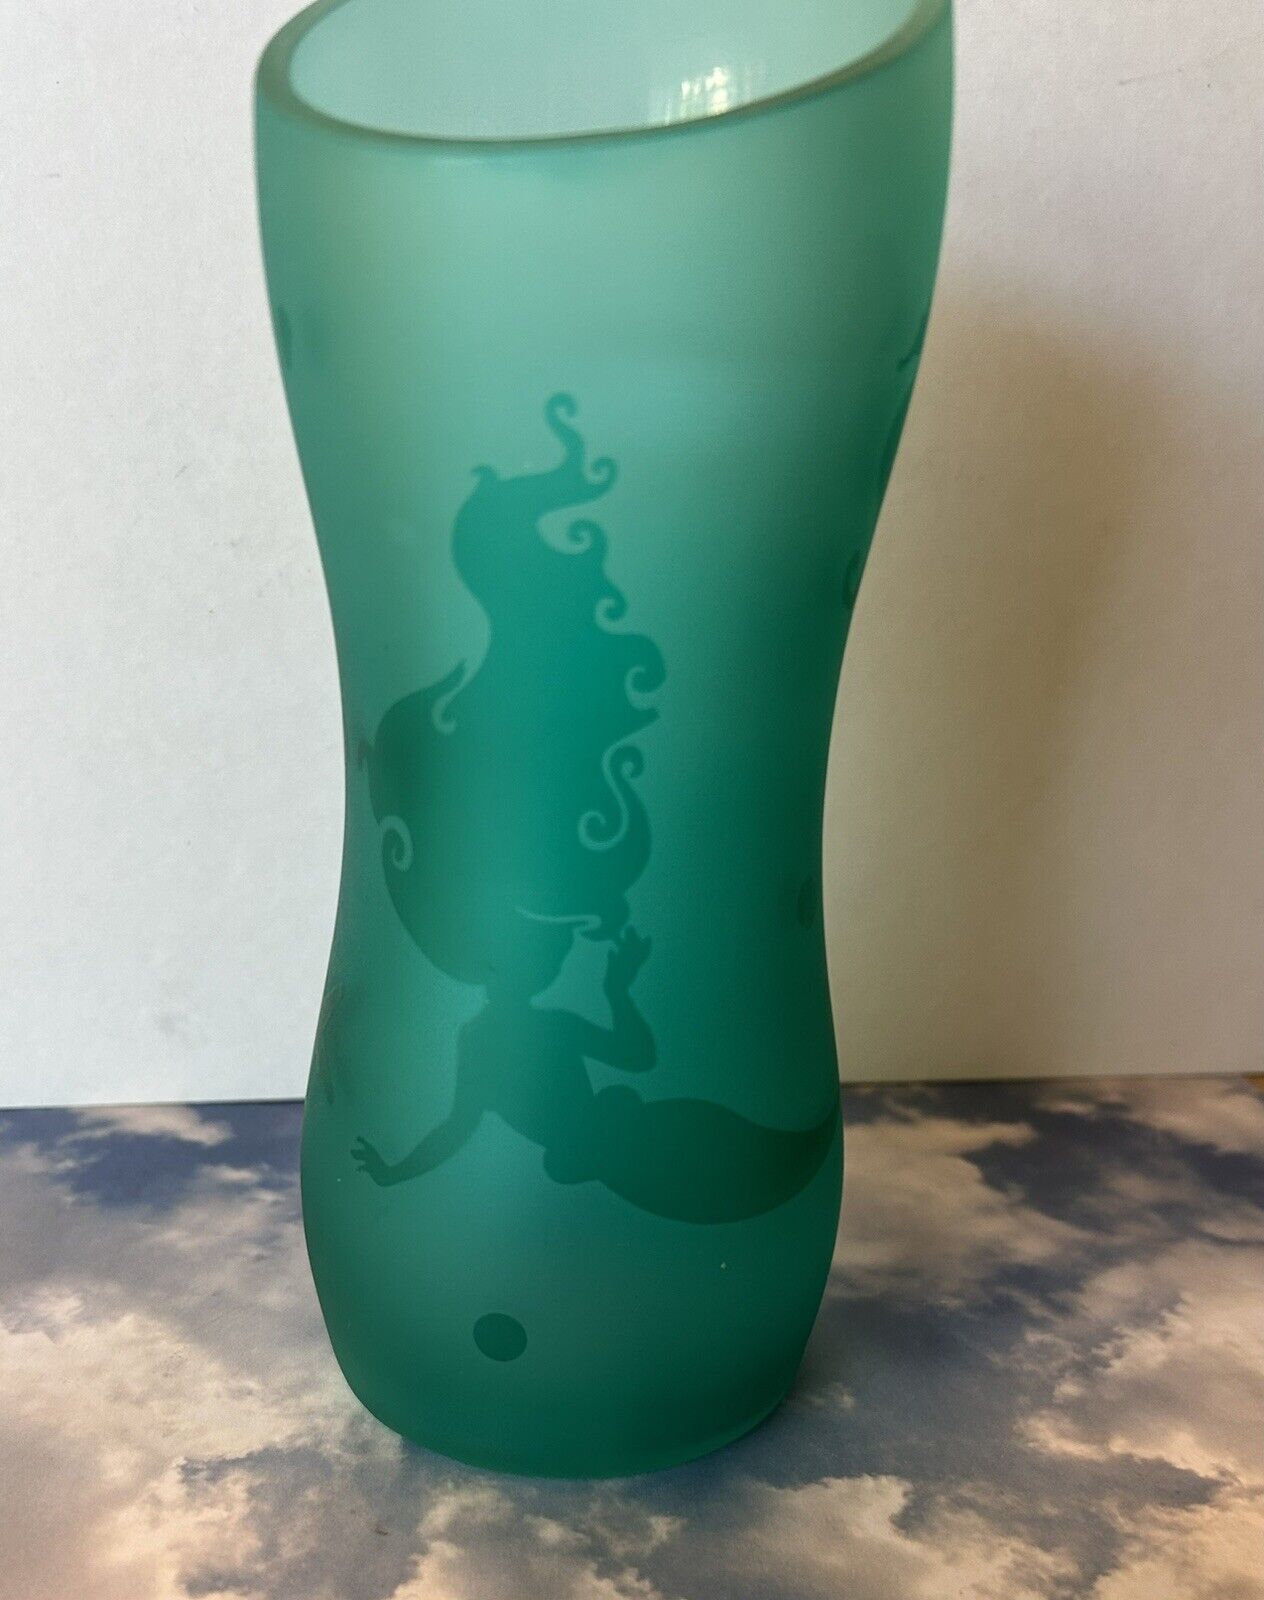 DISNEY * ARIEL LITTLE MERMAID FROSTED GLASS TEAL VASE * NEW